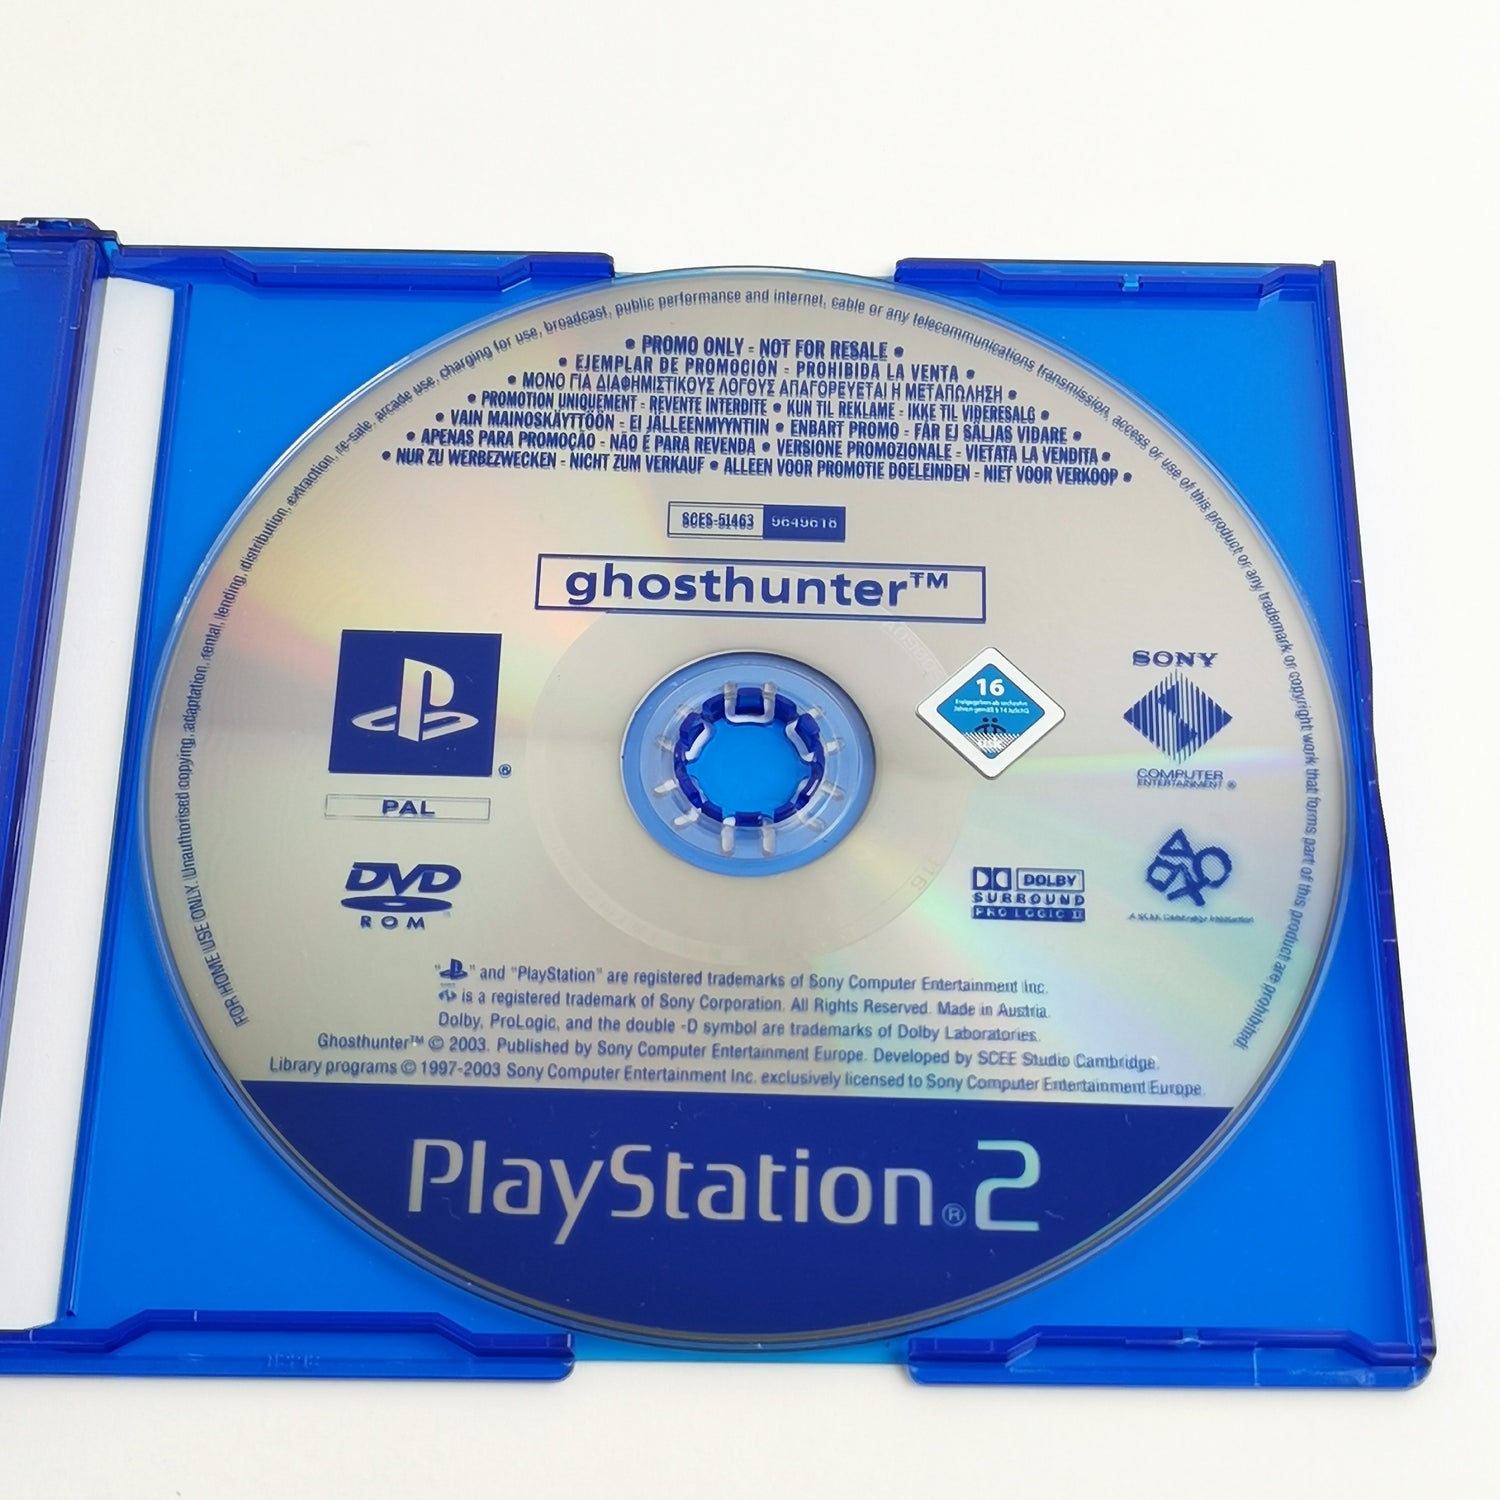 Sony Playstation 2 Promo Game: Ghosthunter - Full Version | PS2 PAL